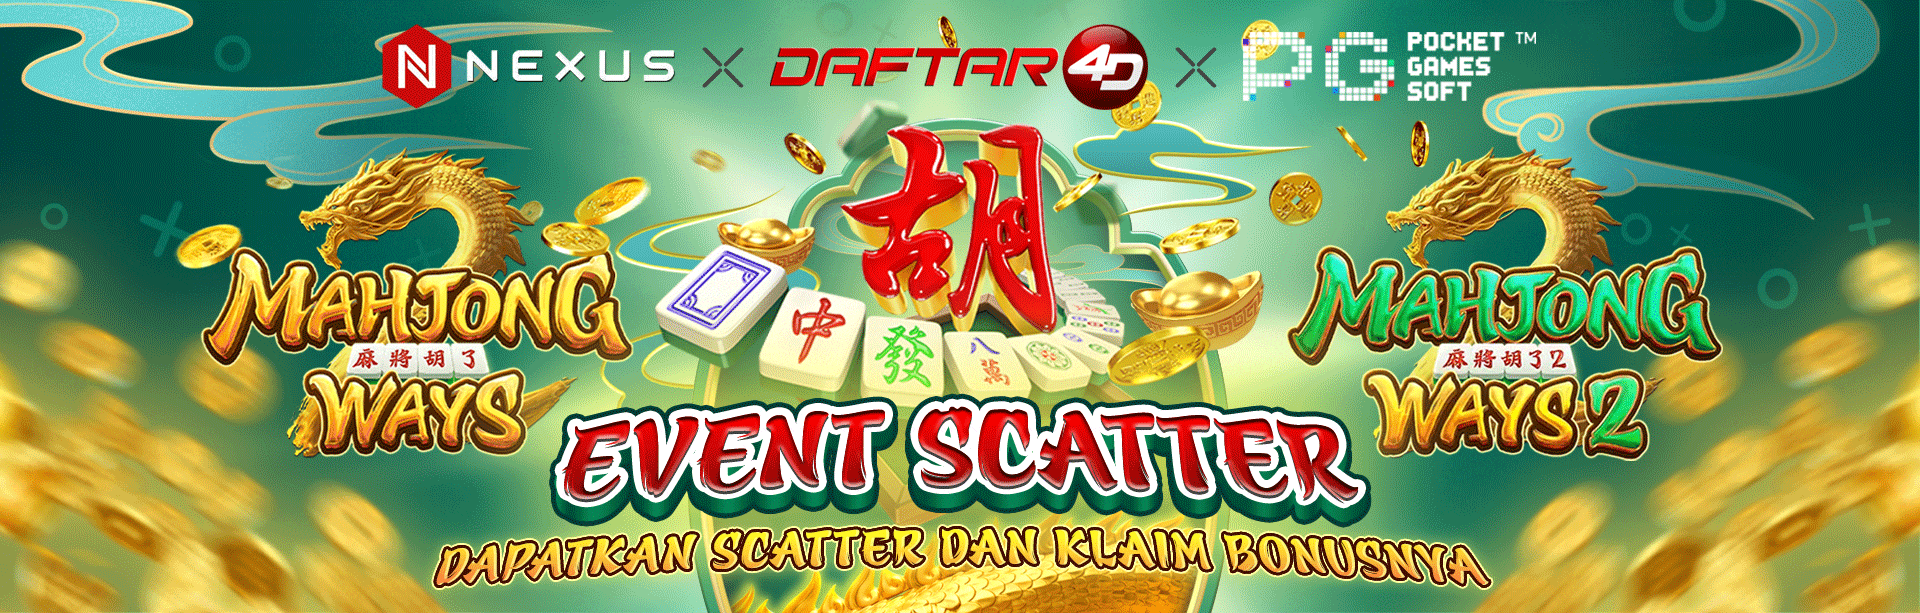 SPECIAL EVENT SCATTER MAHJONG WAYS DAFTAR4D X PG SOFT